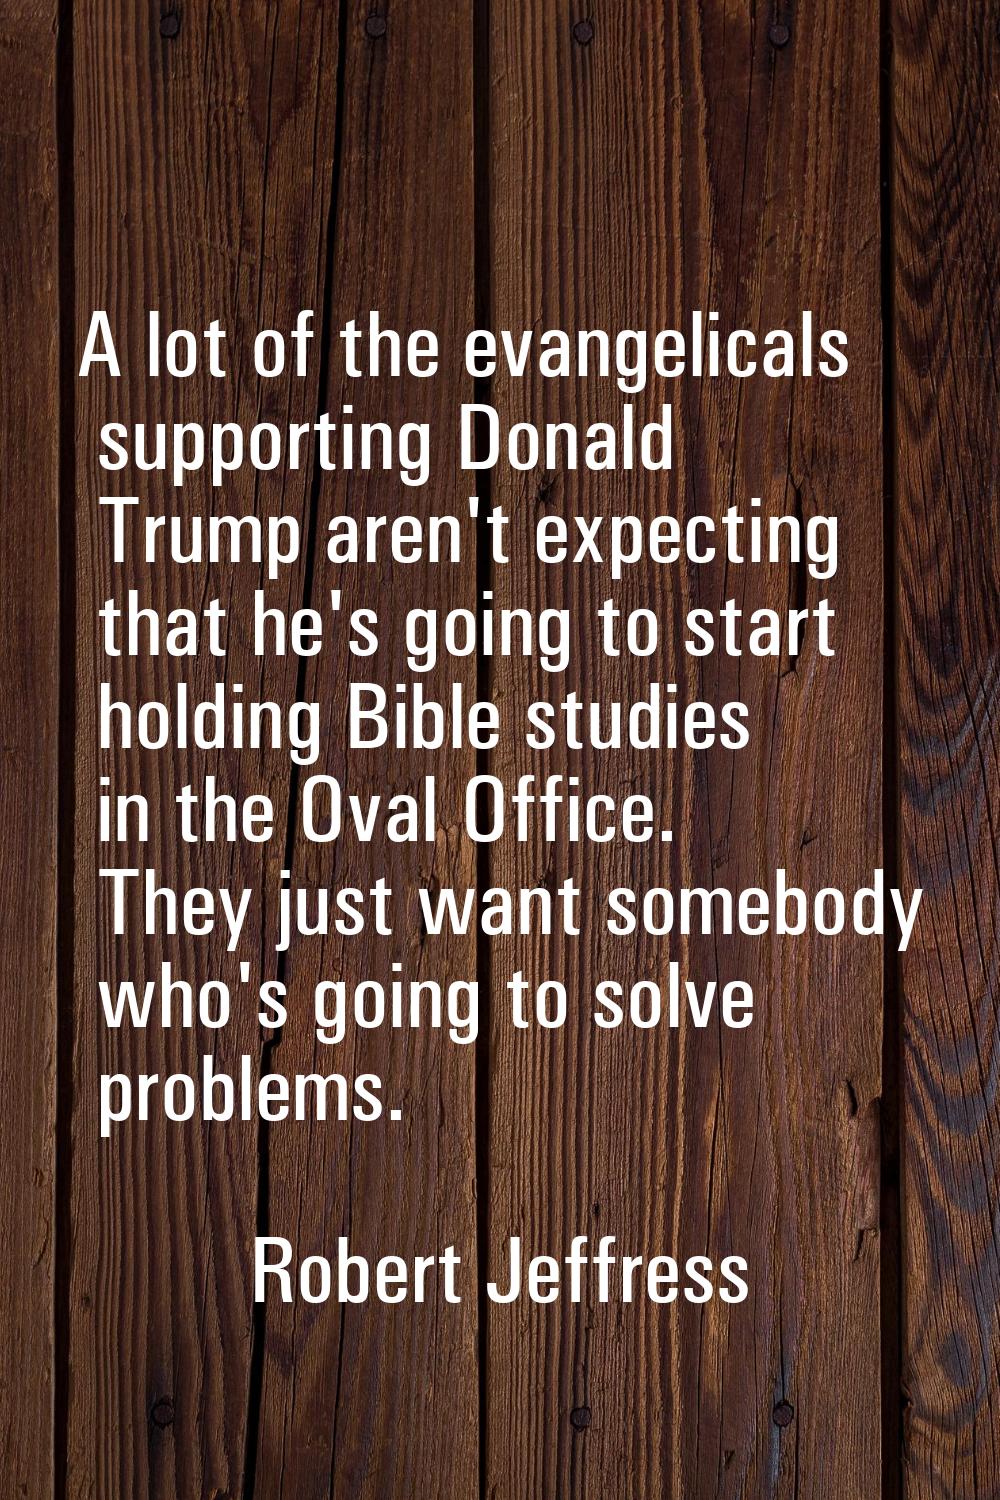 A lot of the evangelicals supporting Donald Trump aren't expecting that he's going to start holding